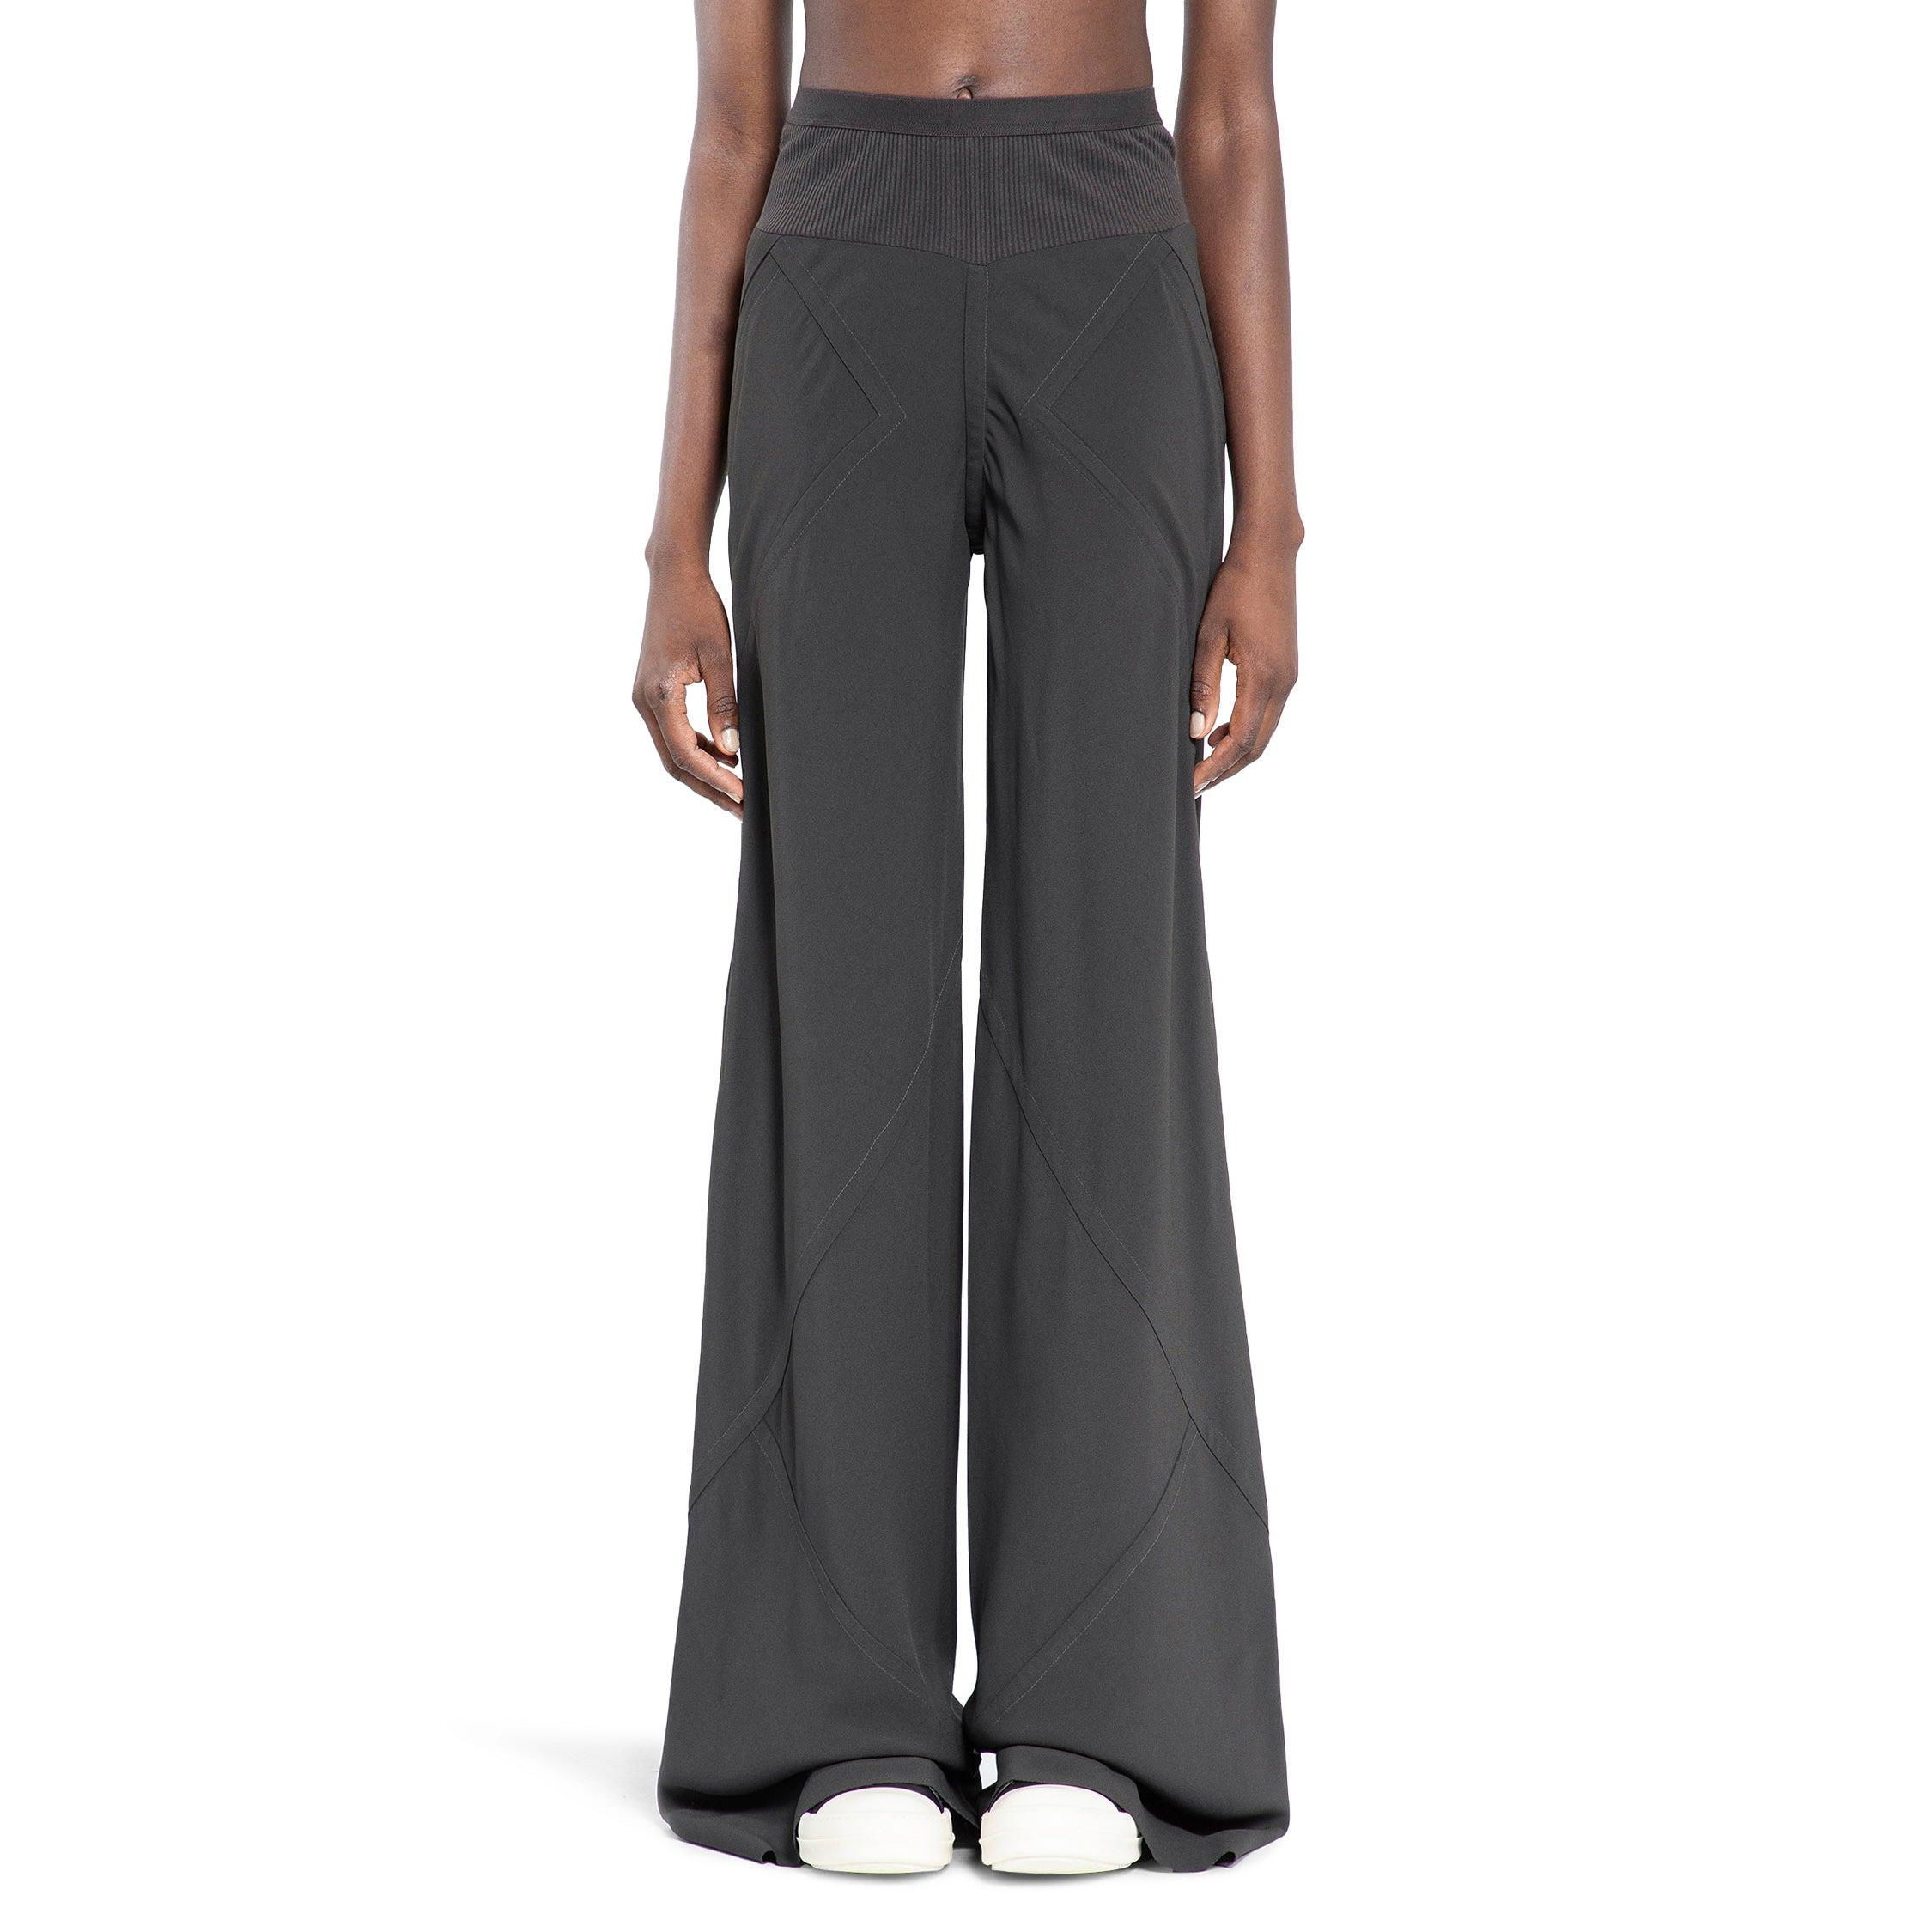 RICK OWENS WOMAN GREY TROUSERS by RICK OWENS